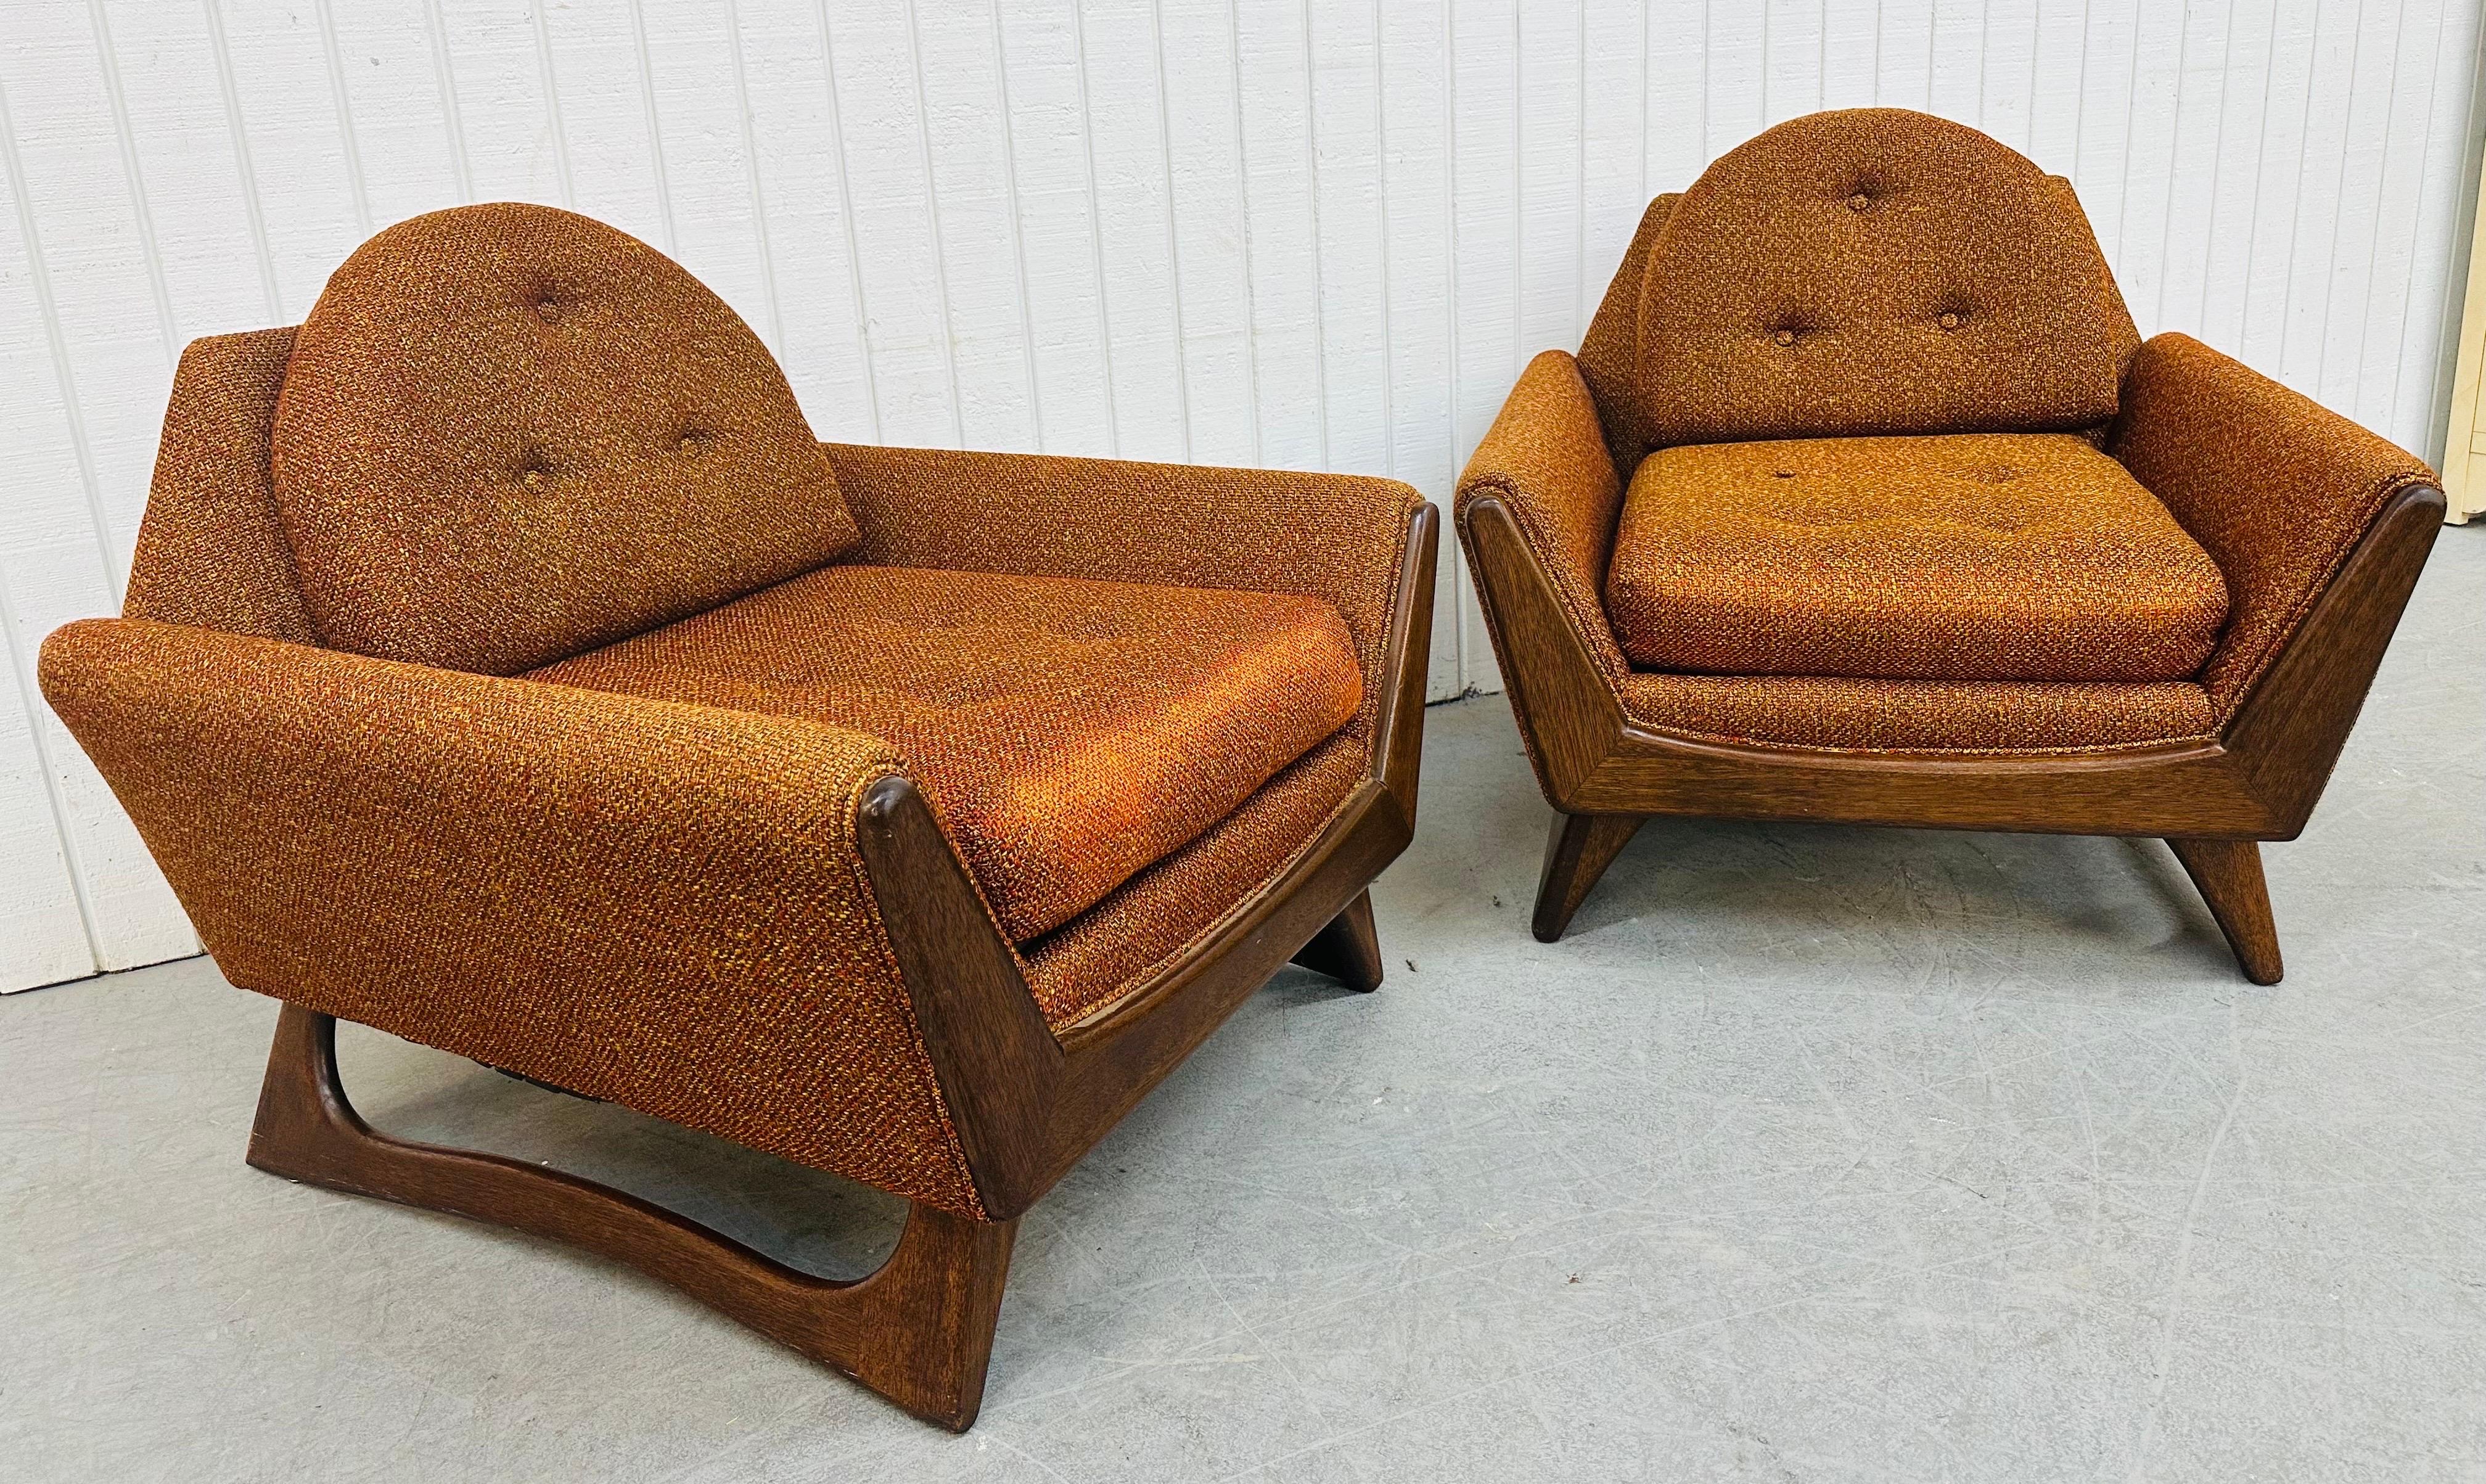 American Mid-Century Modern Adrian Pearsall Style Burnt Orange Walnut Arm Chairs For Sale